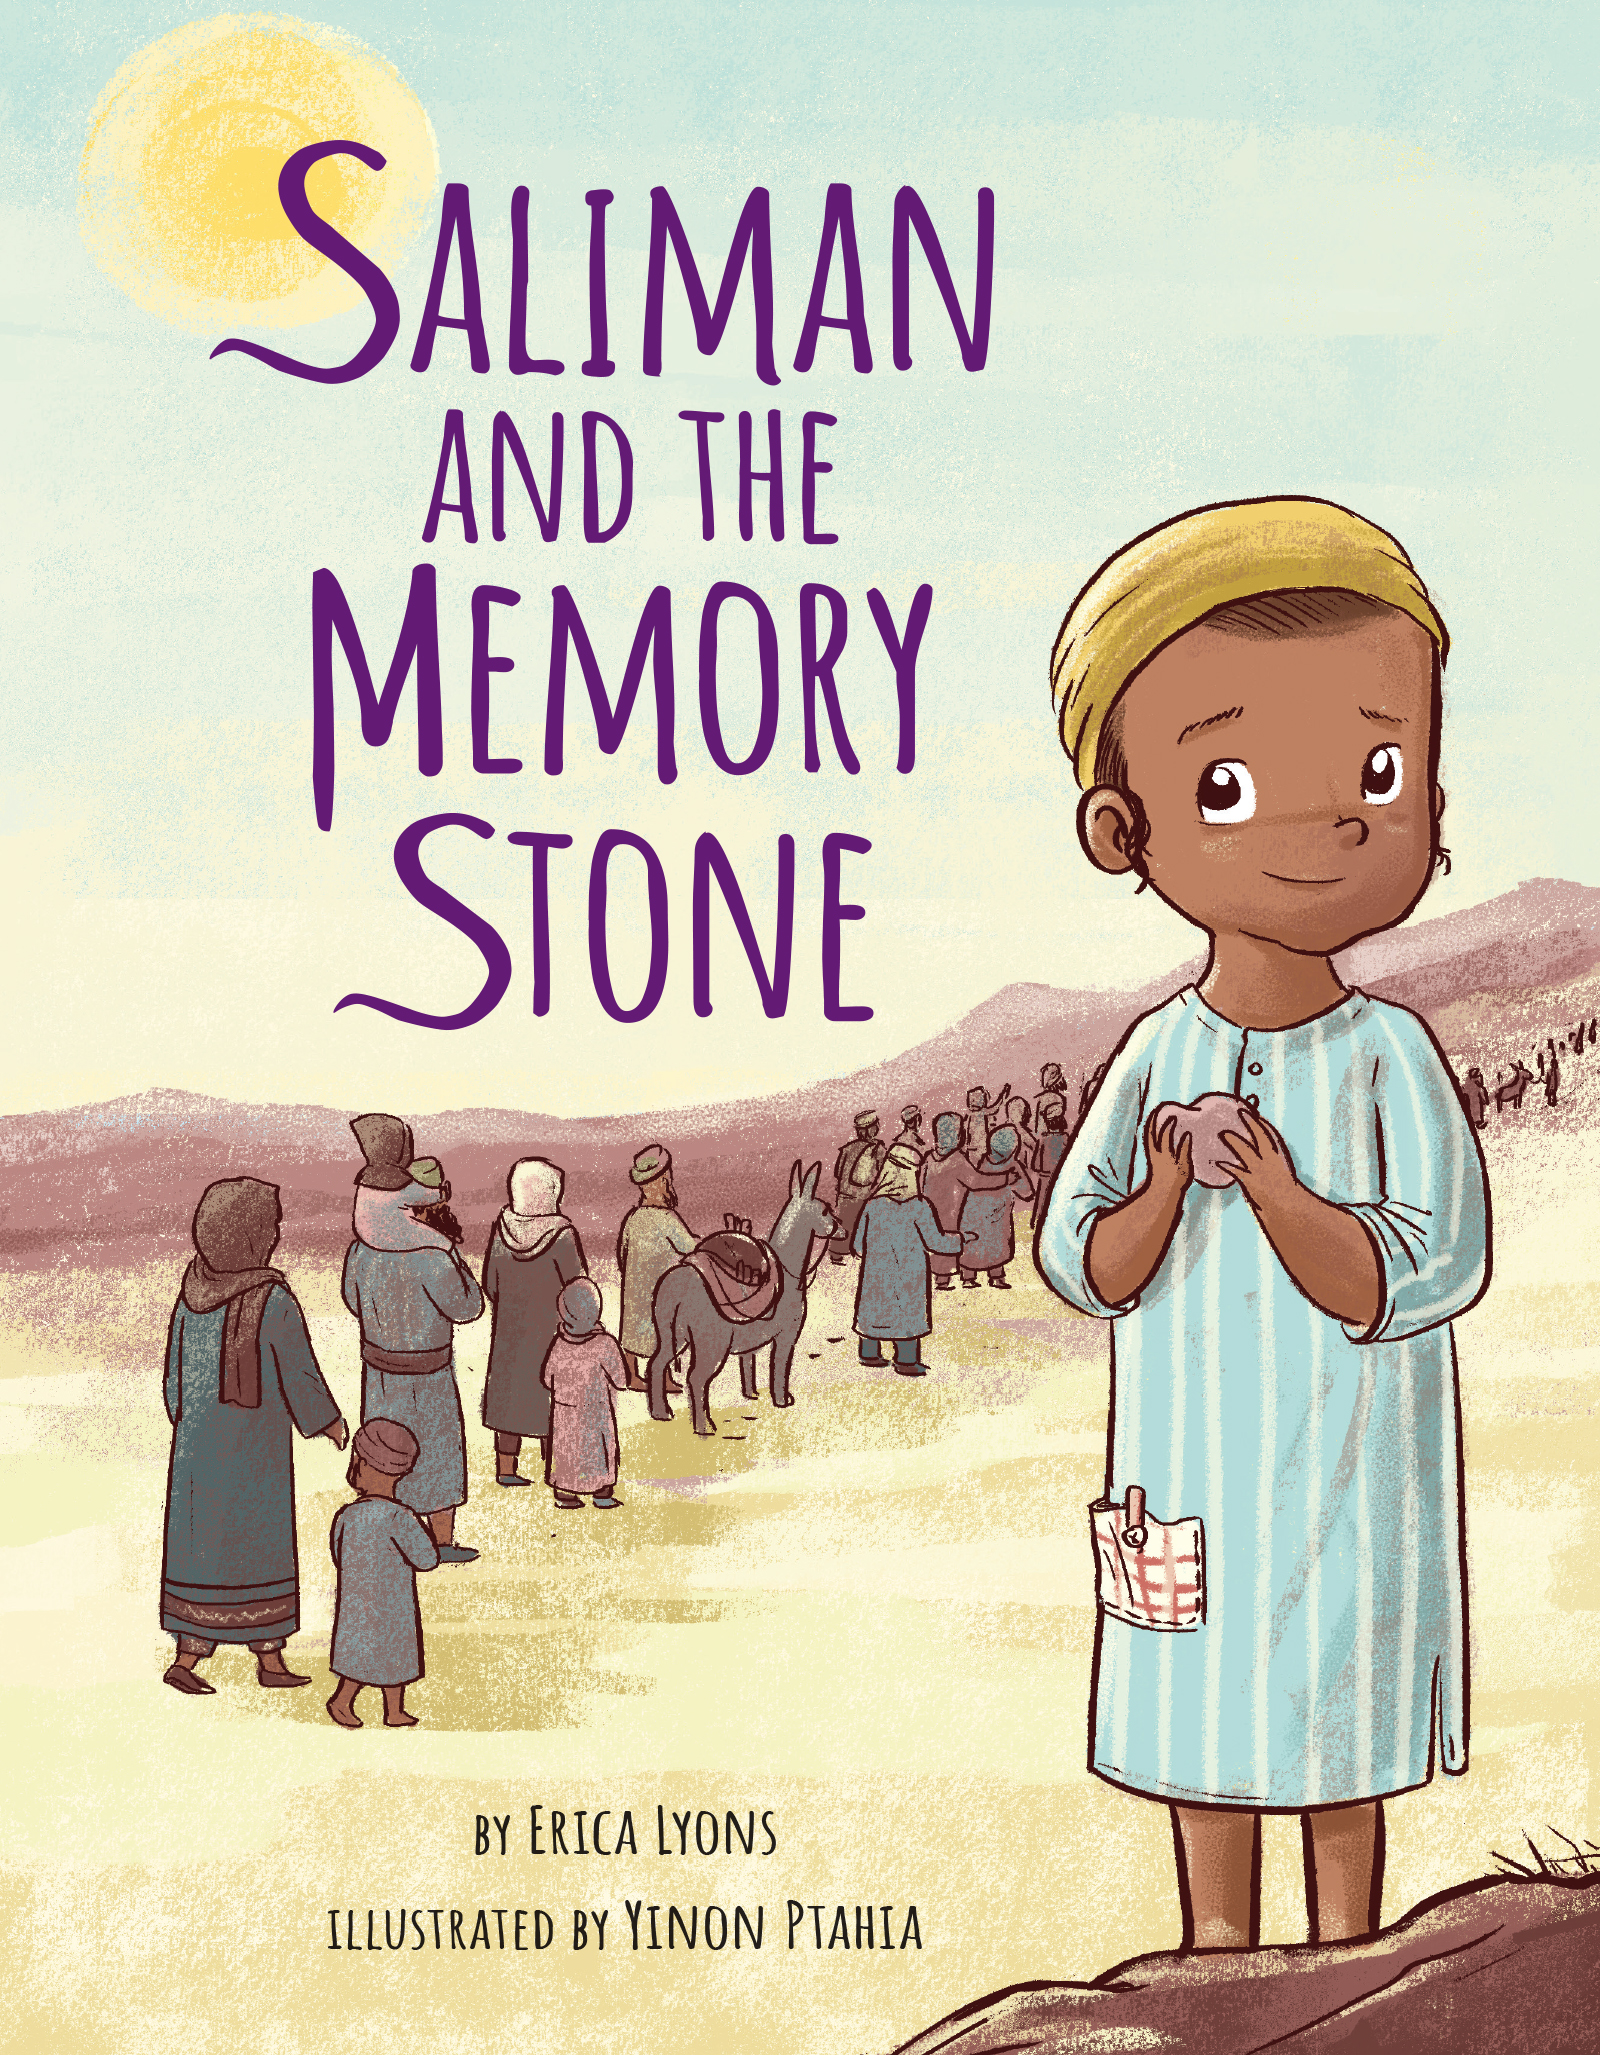 Saliman and the Memory Stone